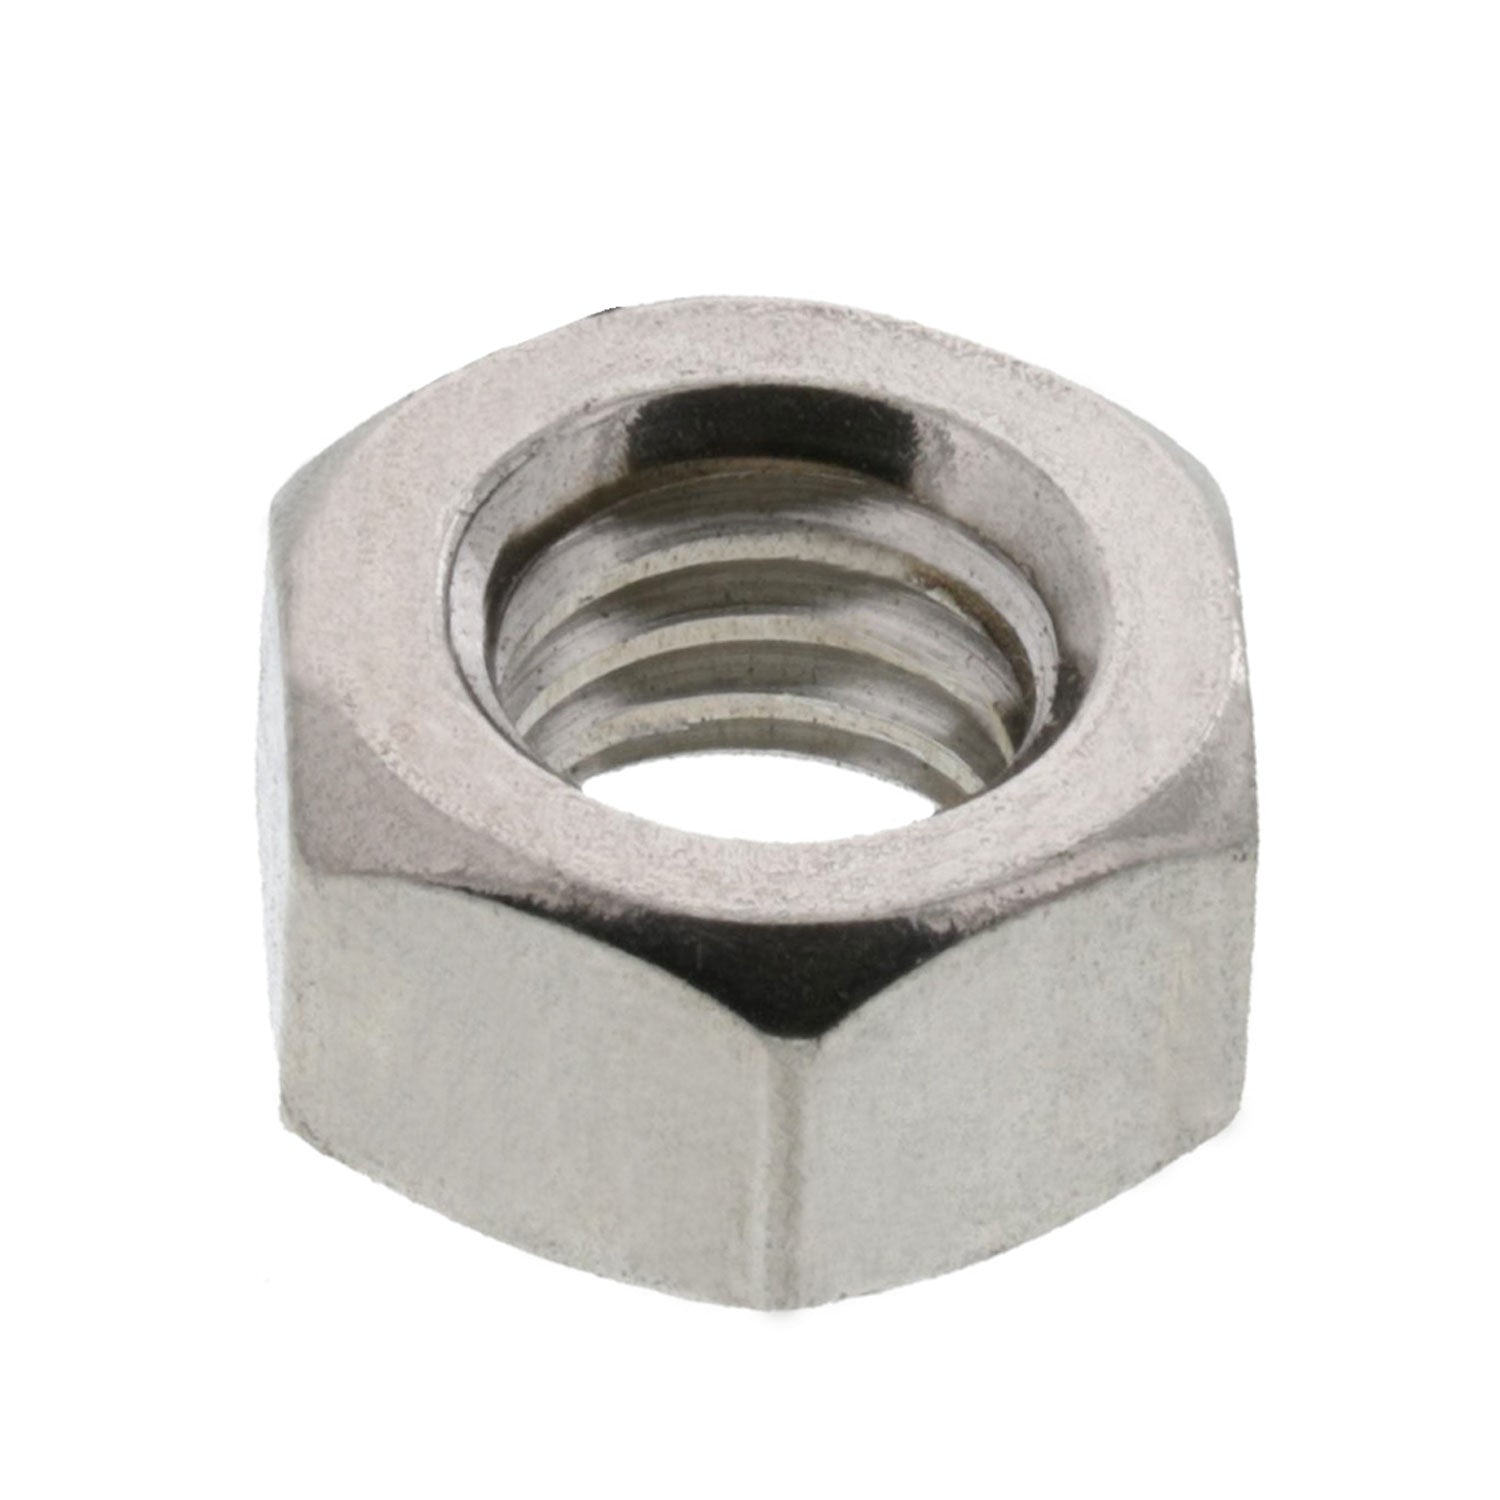 100 5/16-18 Coarse Thread Wing Thumb Nut Stainless Steel Nuts 5/16x18 